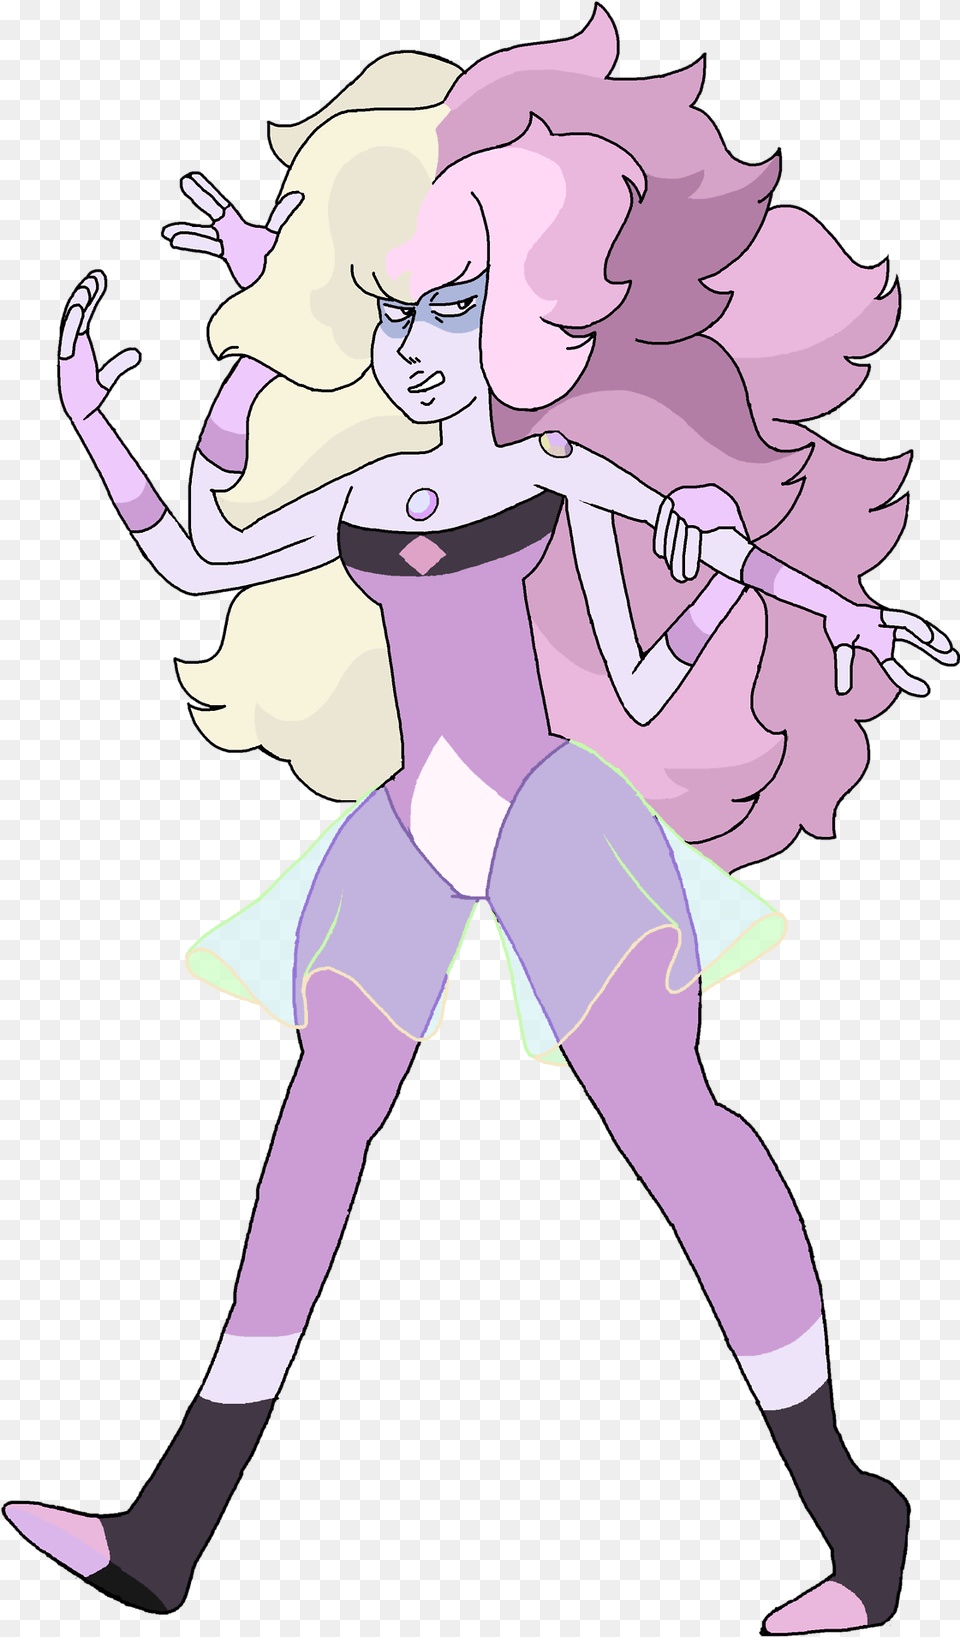 Gemcrusta Cleaner Of My Homeworld Rainbow Quartz Steven Universe Homeworld Rainbow Quartz, Book, Comics, Publication, Person Free Transparent Png